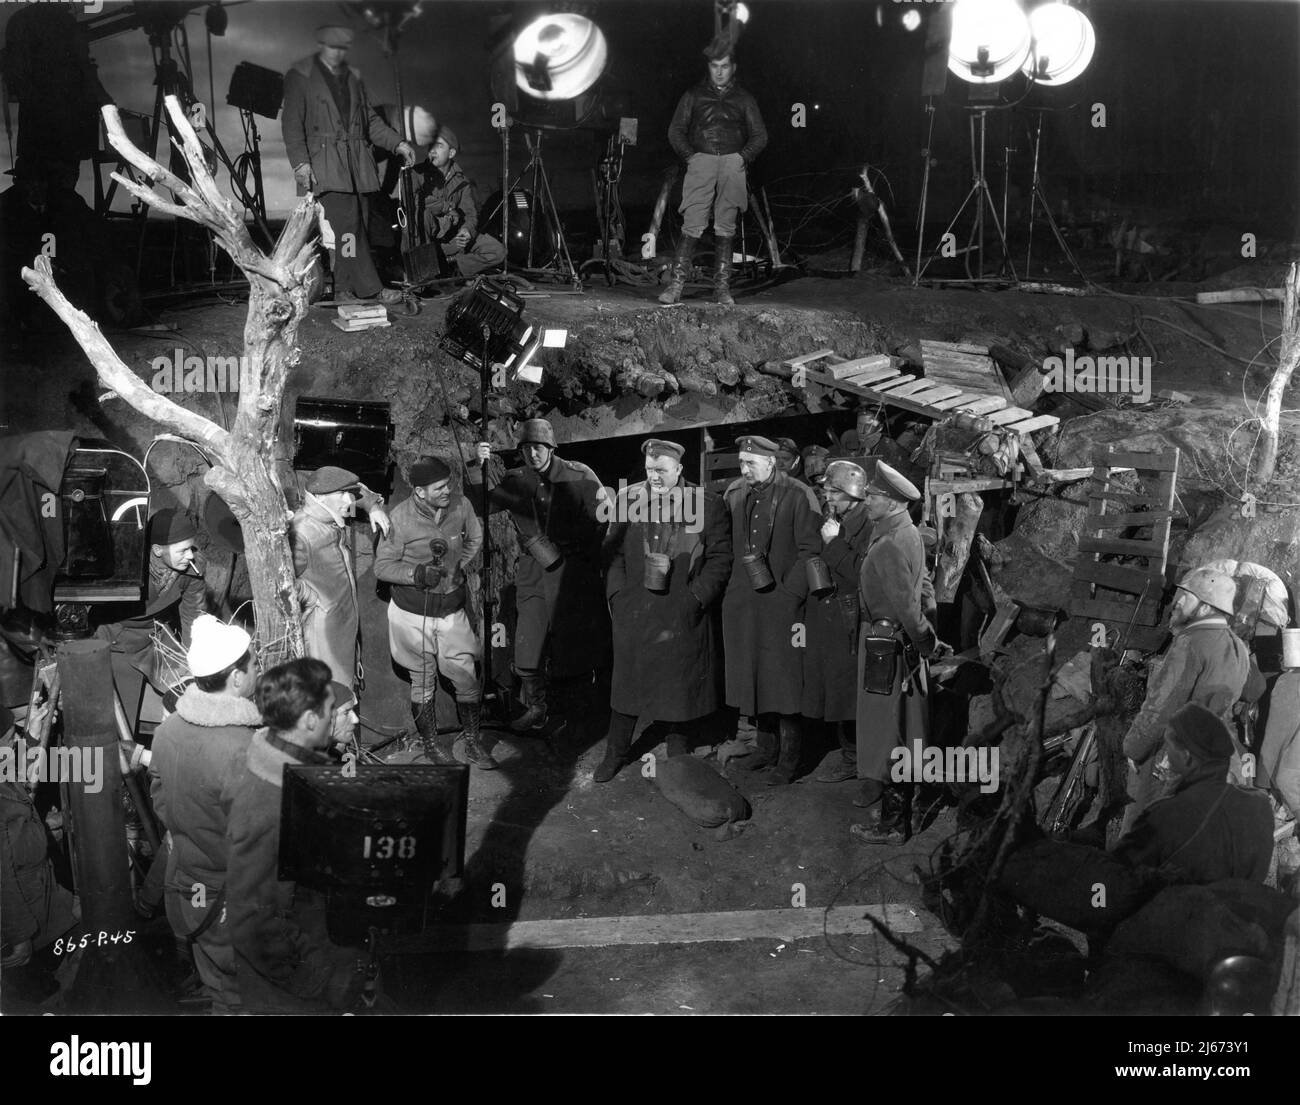 Director JAMES WHALE (by camera with cigarette in mouth) Cinematographer JOHN J. MESCALL (to right of tree) ANDY DEVINE SLIM SUMMERVILLE and JOHN EMERY on set candid during filming of THE ROAD BACK 1937 director JAMES WHALE novel Erich Maria Remarque screenplay Charles Kenyon and R.C. Sherriff music Dimitri Tiomkin art direction Charles D. Hall Universal Pictures Stock Photo